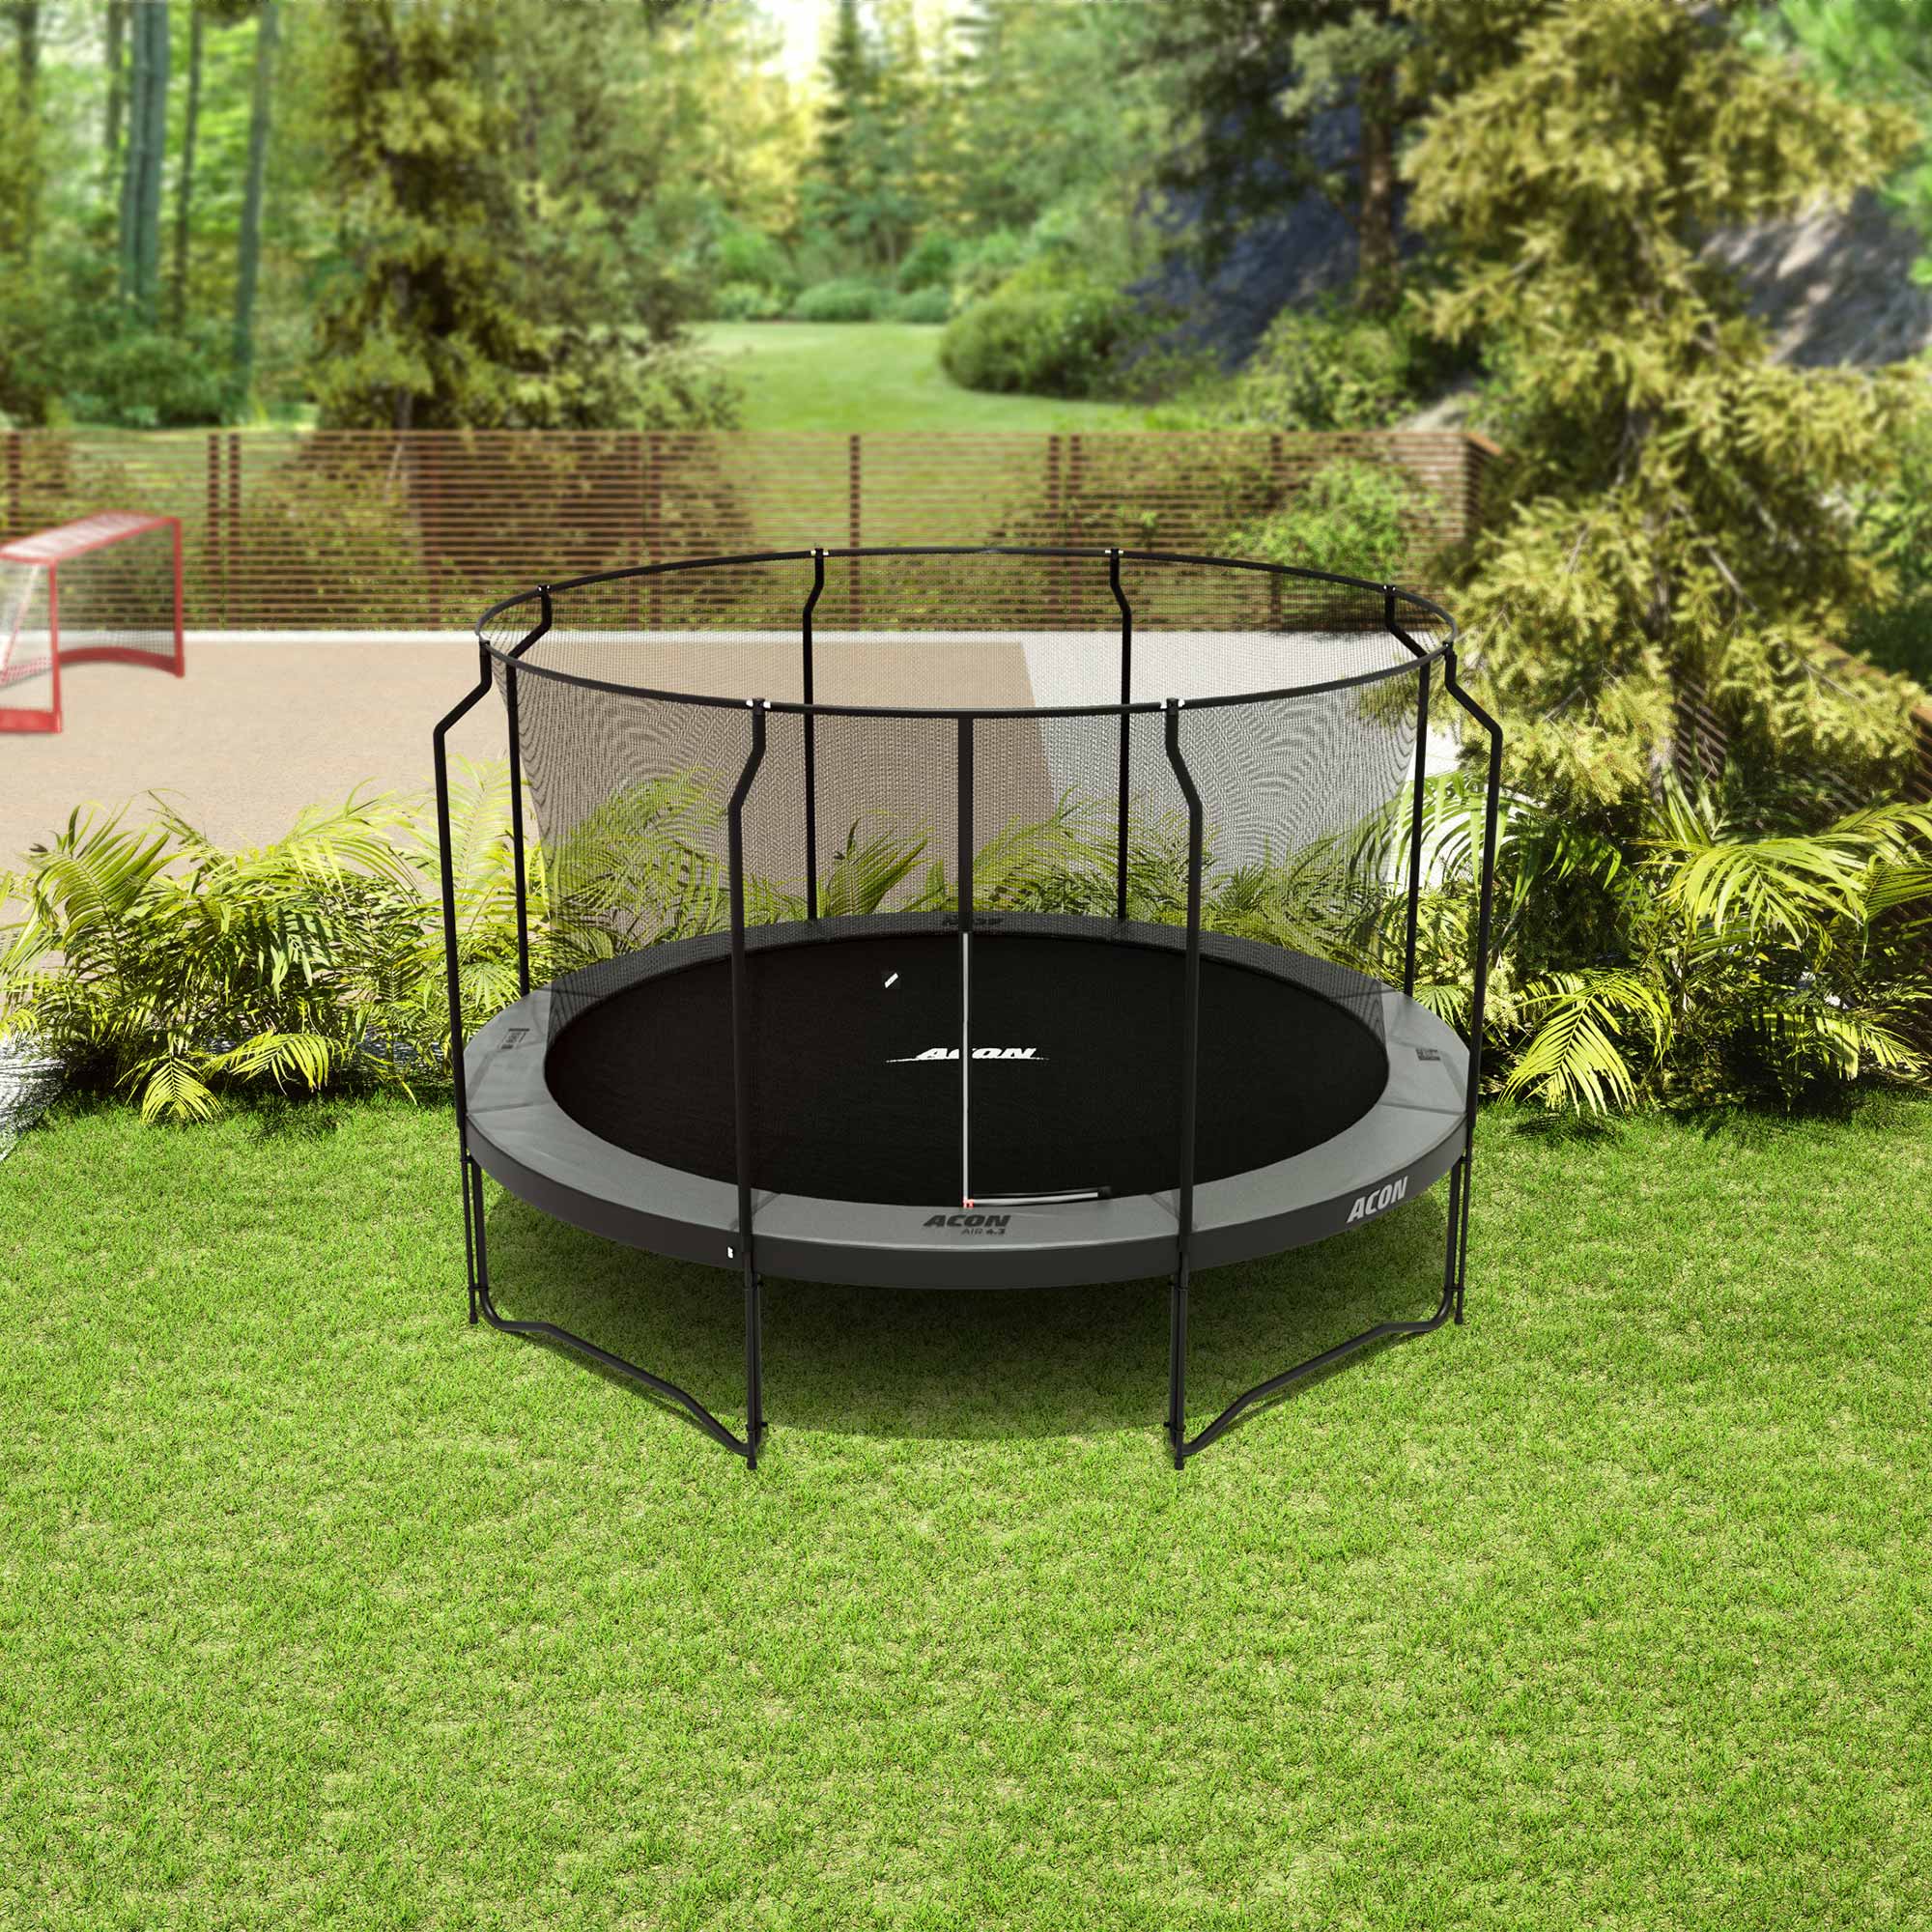 ACON Air 14ft Trampoline Black with Premium Enclosure in the backyard.